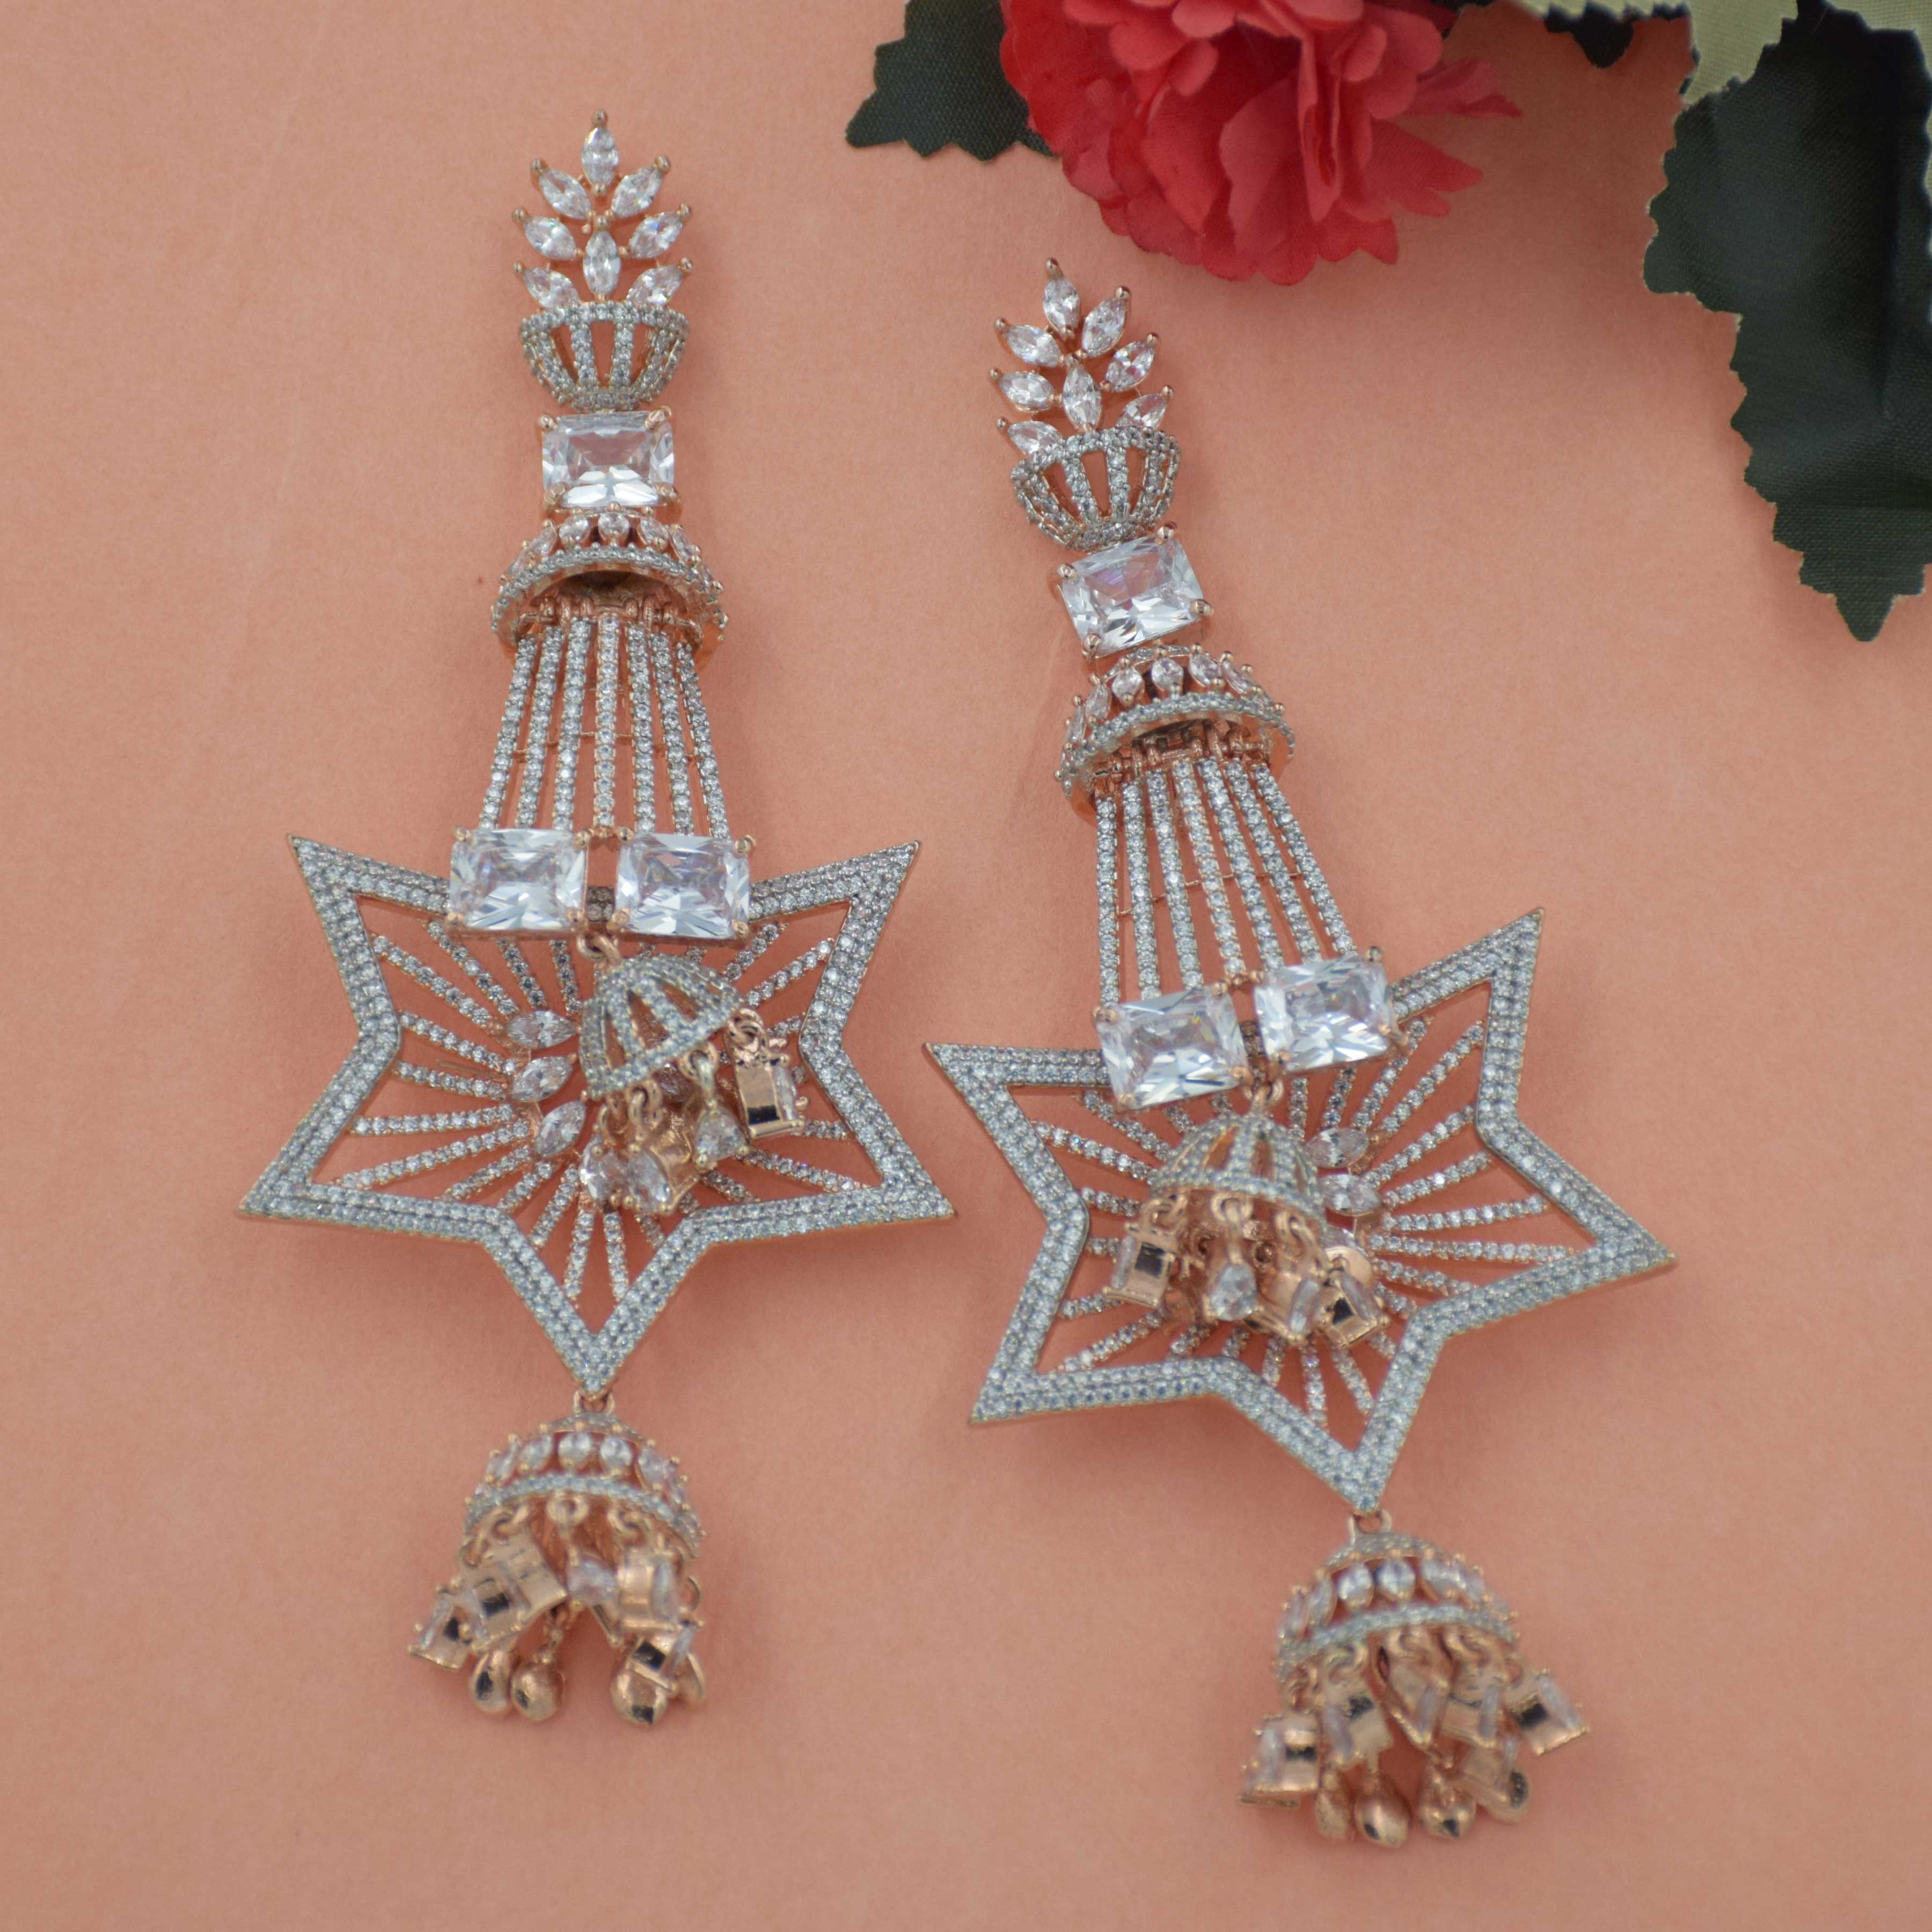 AD Bridal Earrings for women at affordable price - Trink Wink Jewels